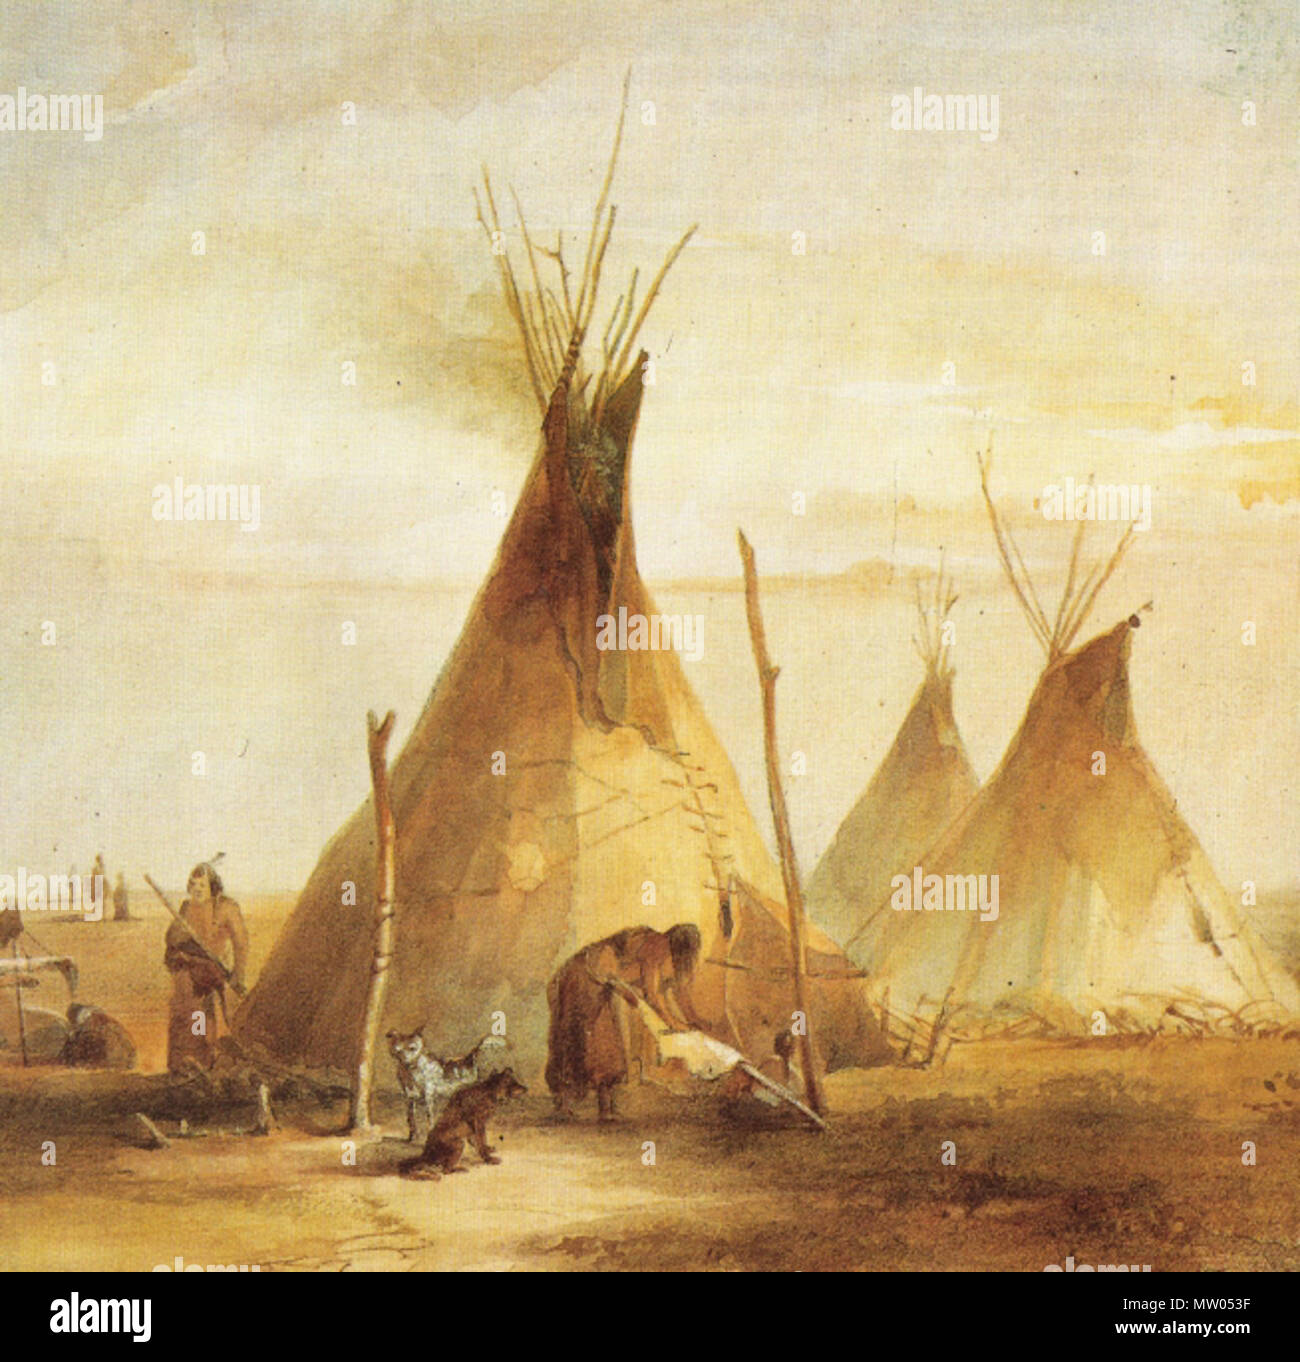 . Sioux tipis  . 1833.    Karl Bodmer  (1809–1893)     Alternative names Charles Bodmer  Description Swiss painter and photographer  Date of birth/death 6 February 1809 30 October 1893  Location of birth/death Zürich Paris  Work period 1820s-1890s  Work location France, Germany, Switzerland, United States  Authority control  : Q124099 VIAF: 71387631 ISNI: 0000 0001 0913 4329 ULAN: 500006745 LCCN: n50010061 NAID: 1098597 WorldCat 560 Sioux tipis Stock Photo